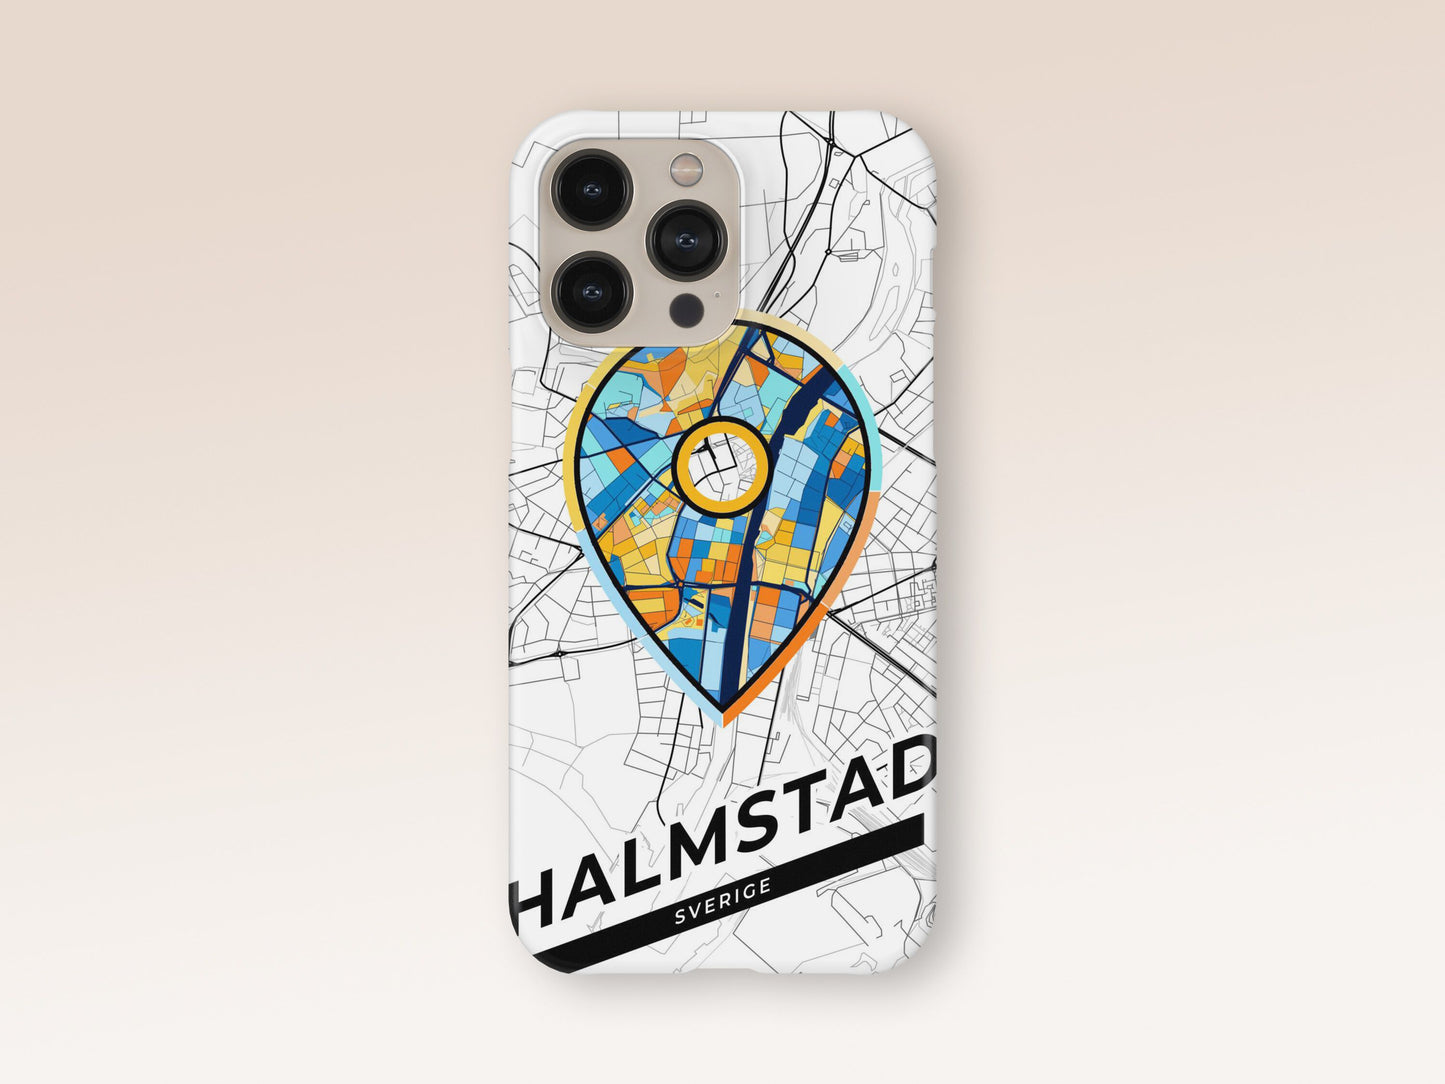 Halmstad Sweden slim phone case with colorful icon. Birthday, wedding or housewarming gift. Couple match cases. 1